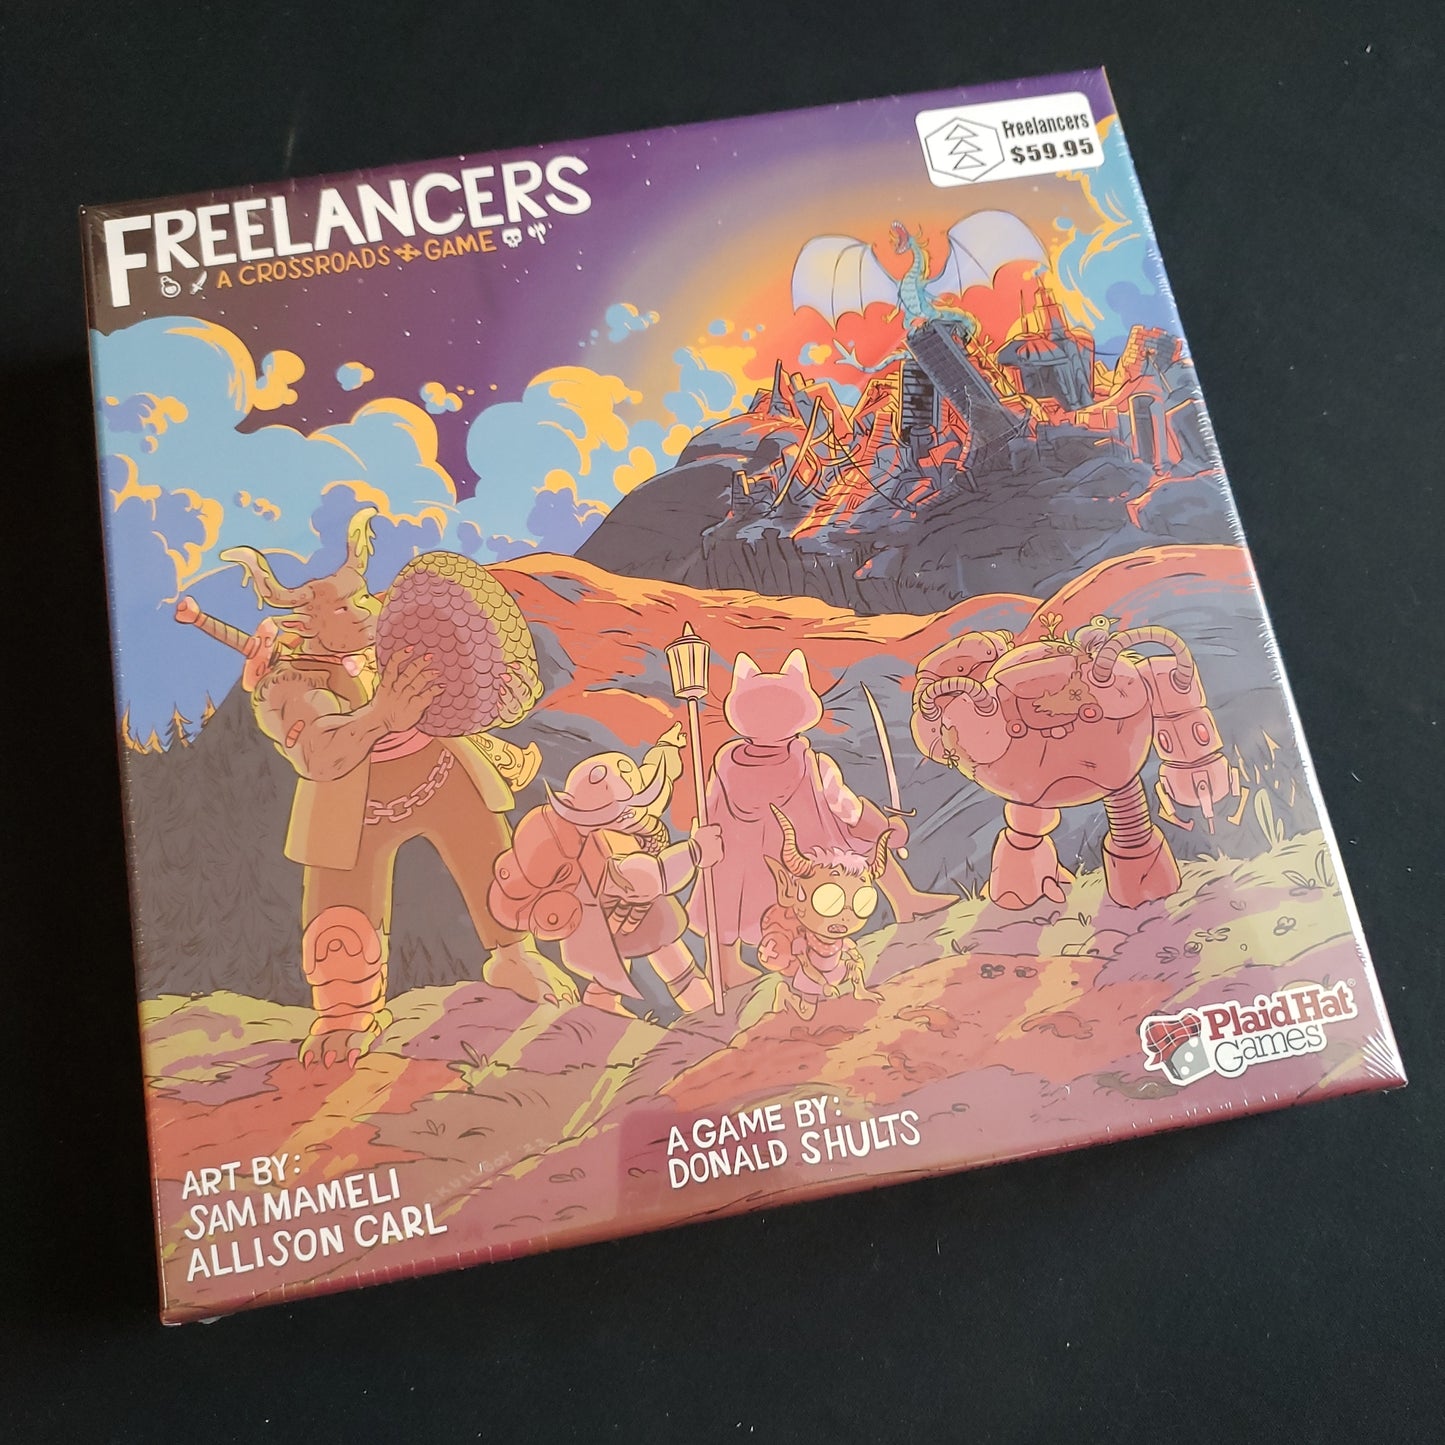 Image shows the front cover of the box of the Freelancers board game